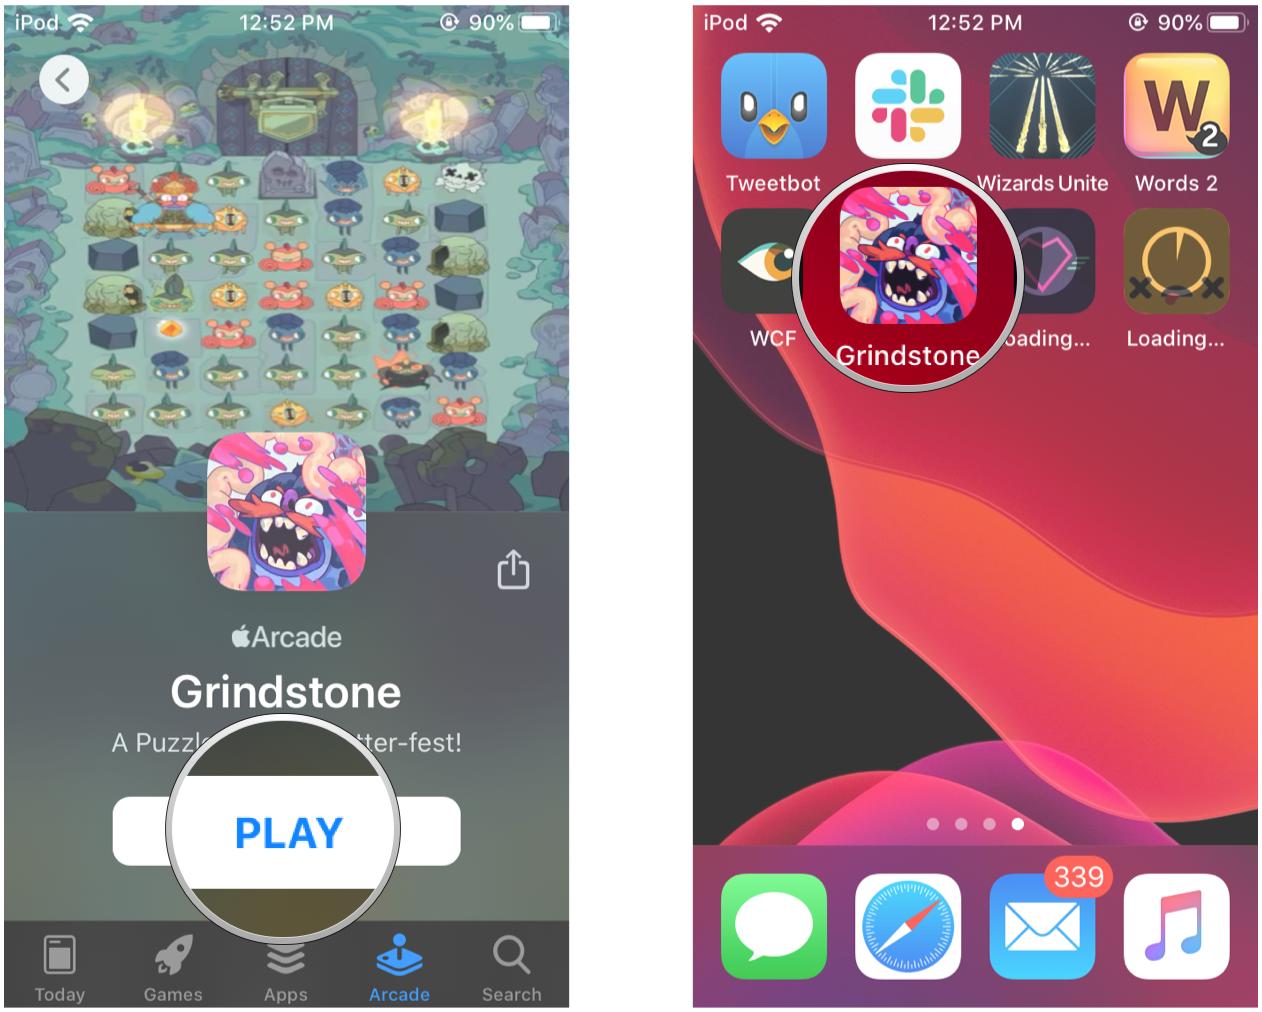 How to select and start playing a game on Apple Arcade on iPhone and iPad by showing steps: Tap Play to start playing, or launch it from the Home Screen like any other app